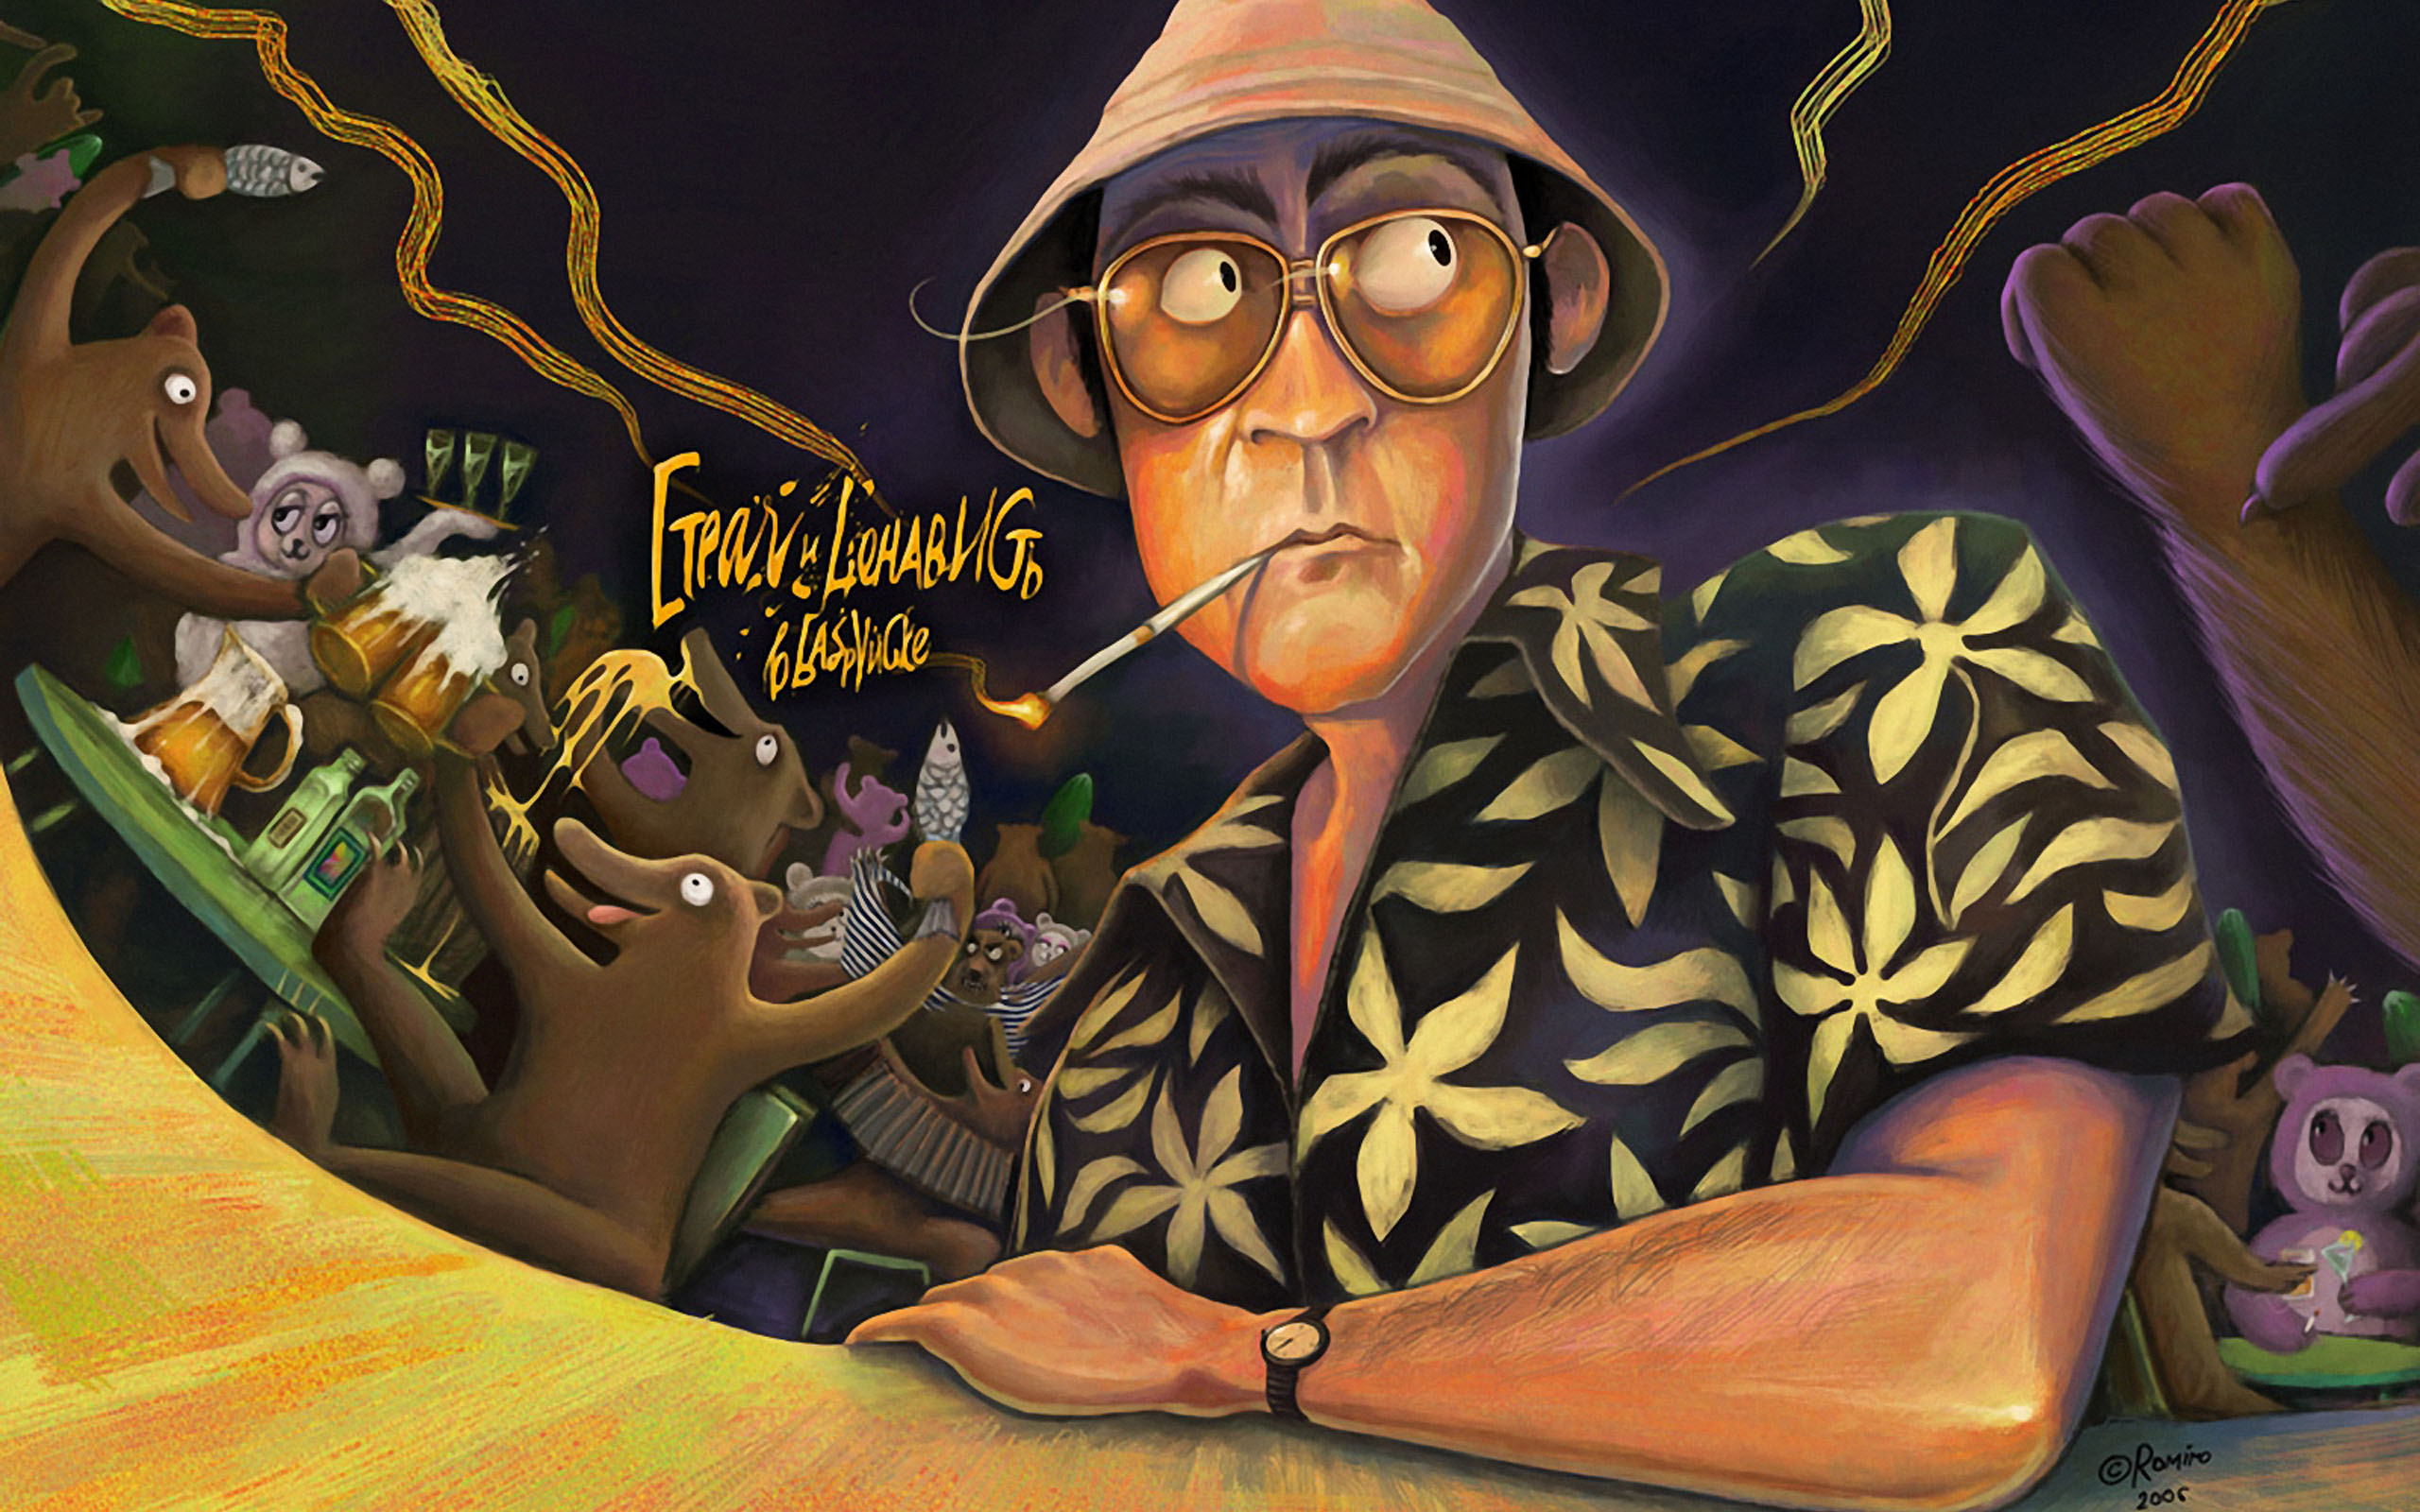 Previous, Funny wallpapers - FEAR AND LOATHING IN LAS VEGAS wallpaper